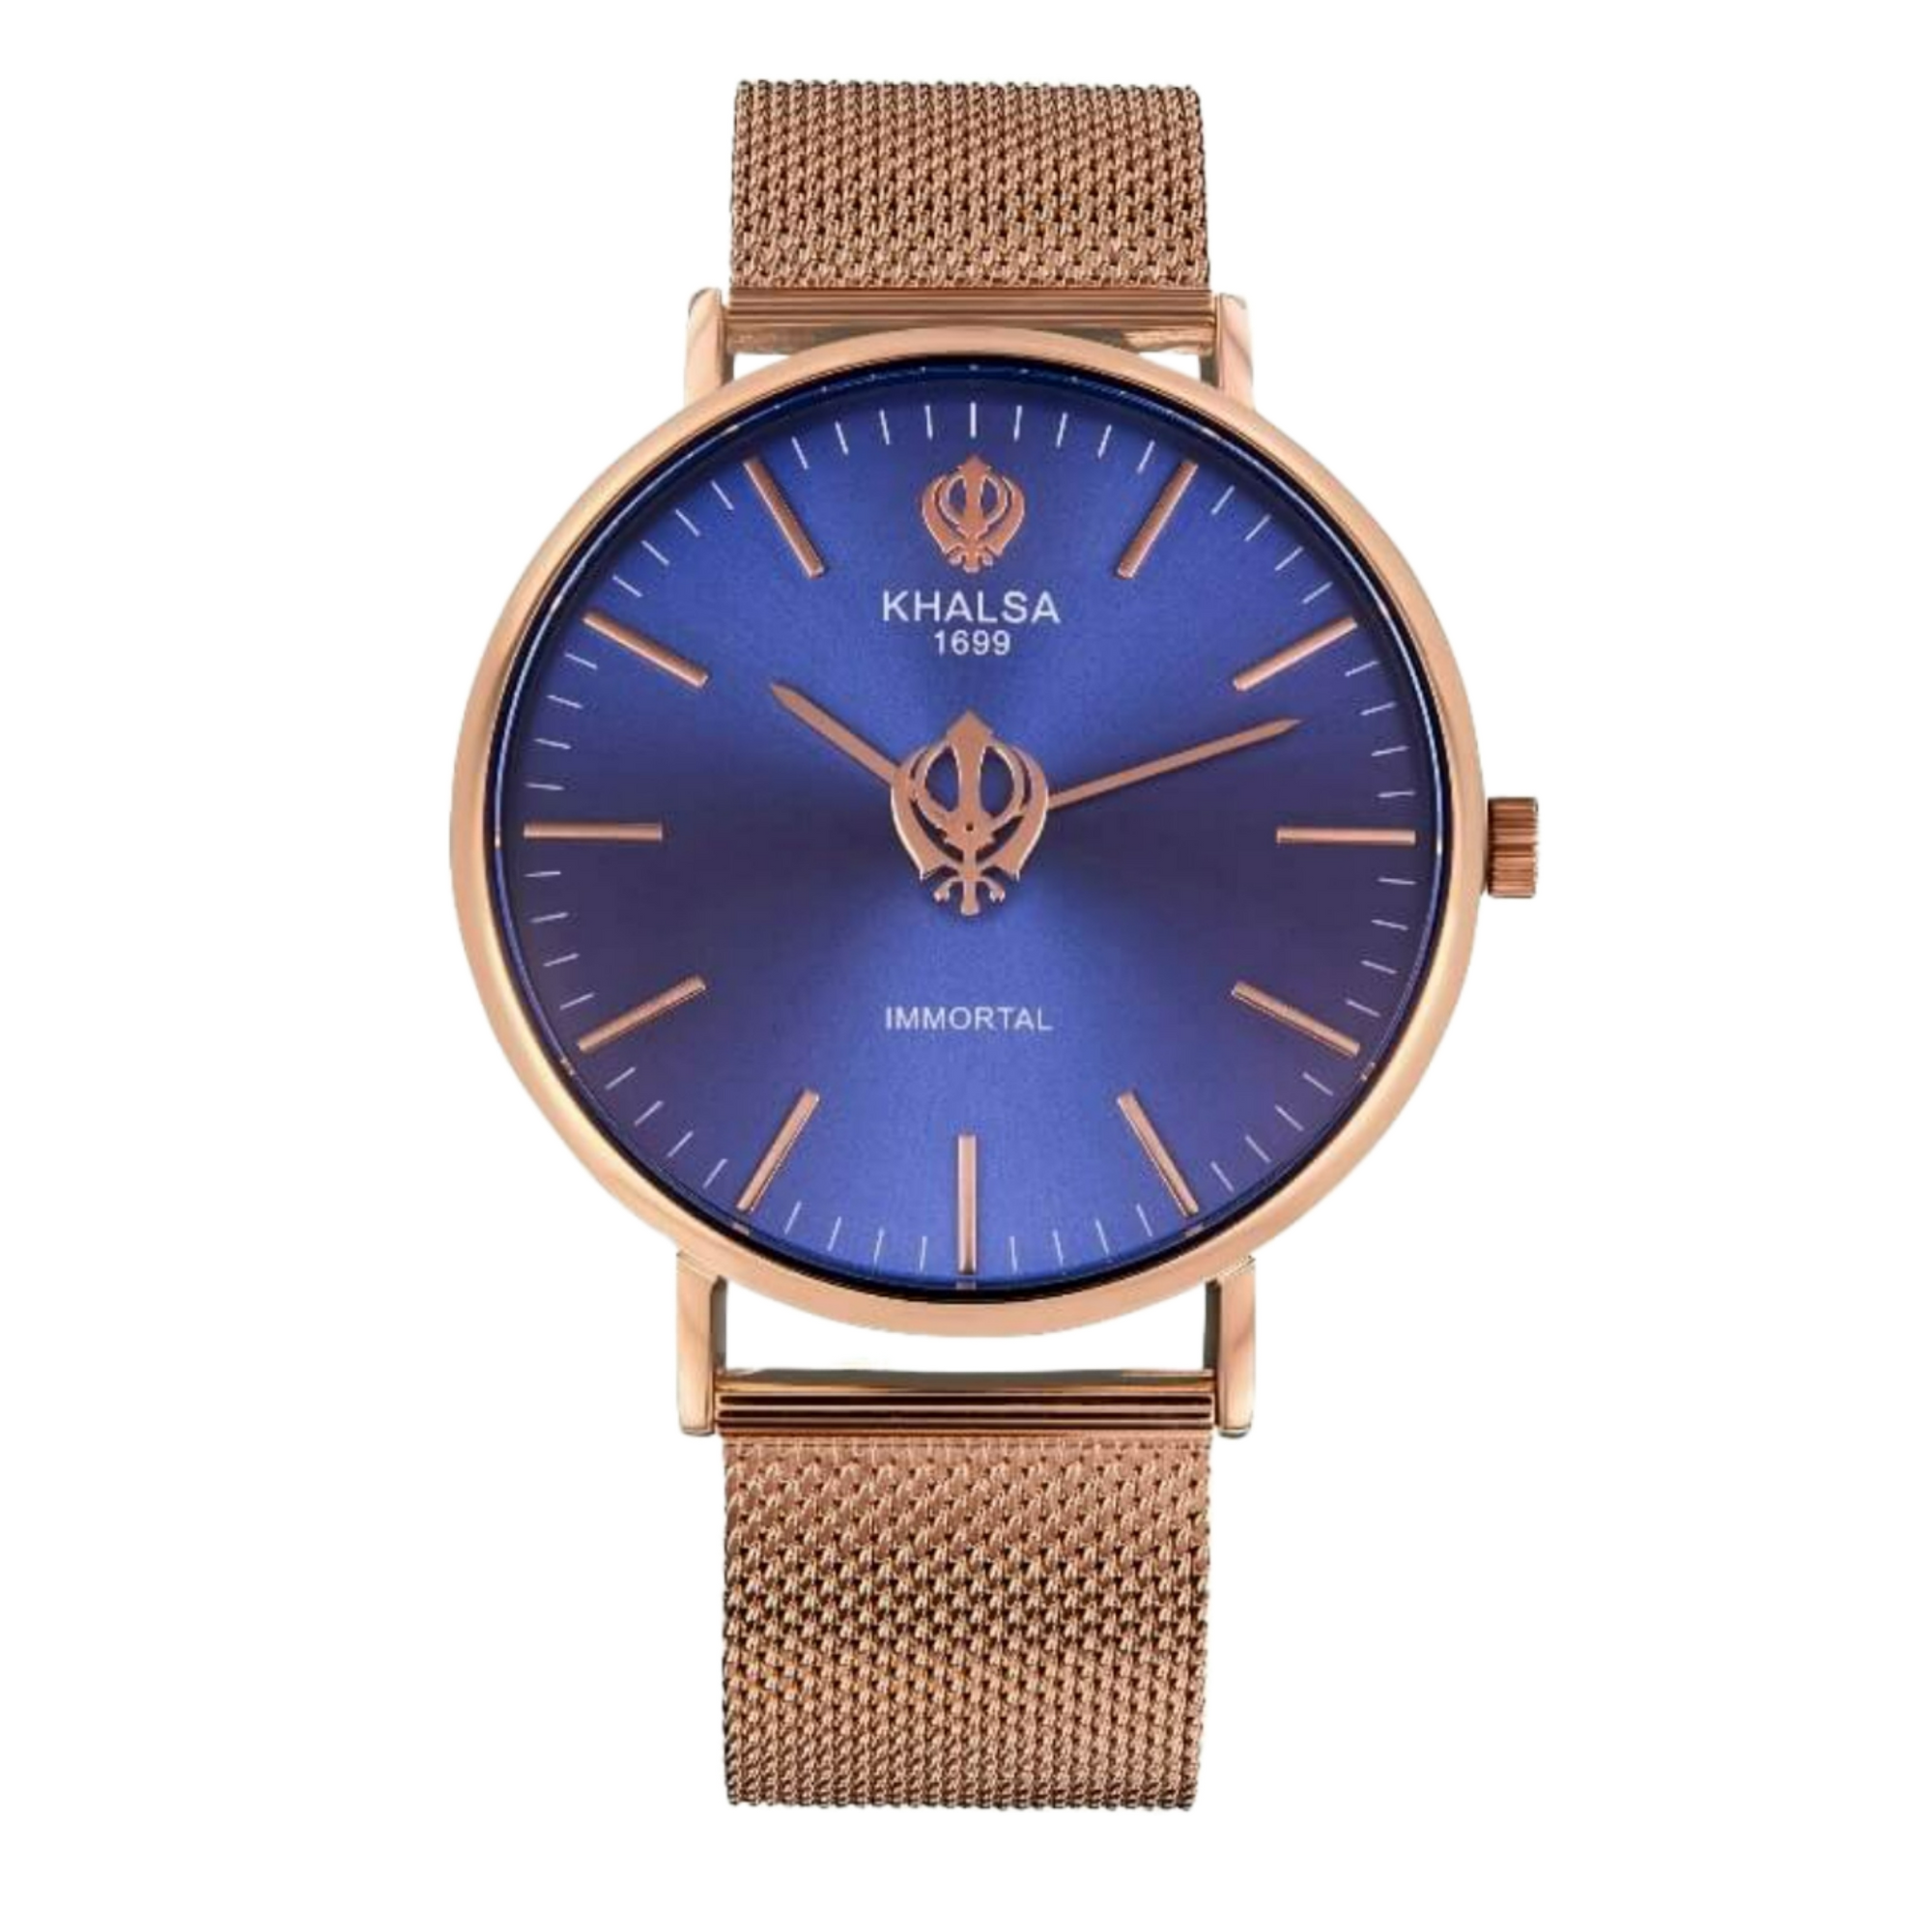 House of Khalsa IMMORTAL Gold Blue Sikh watch with Khanda Symbol, Sun Dial and Stainless Steel Gold Plated Strap - Elegant and Stylish